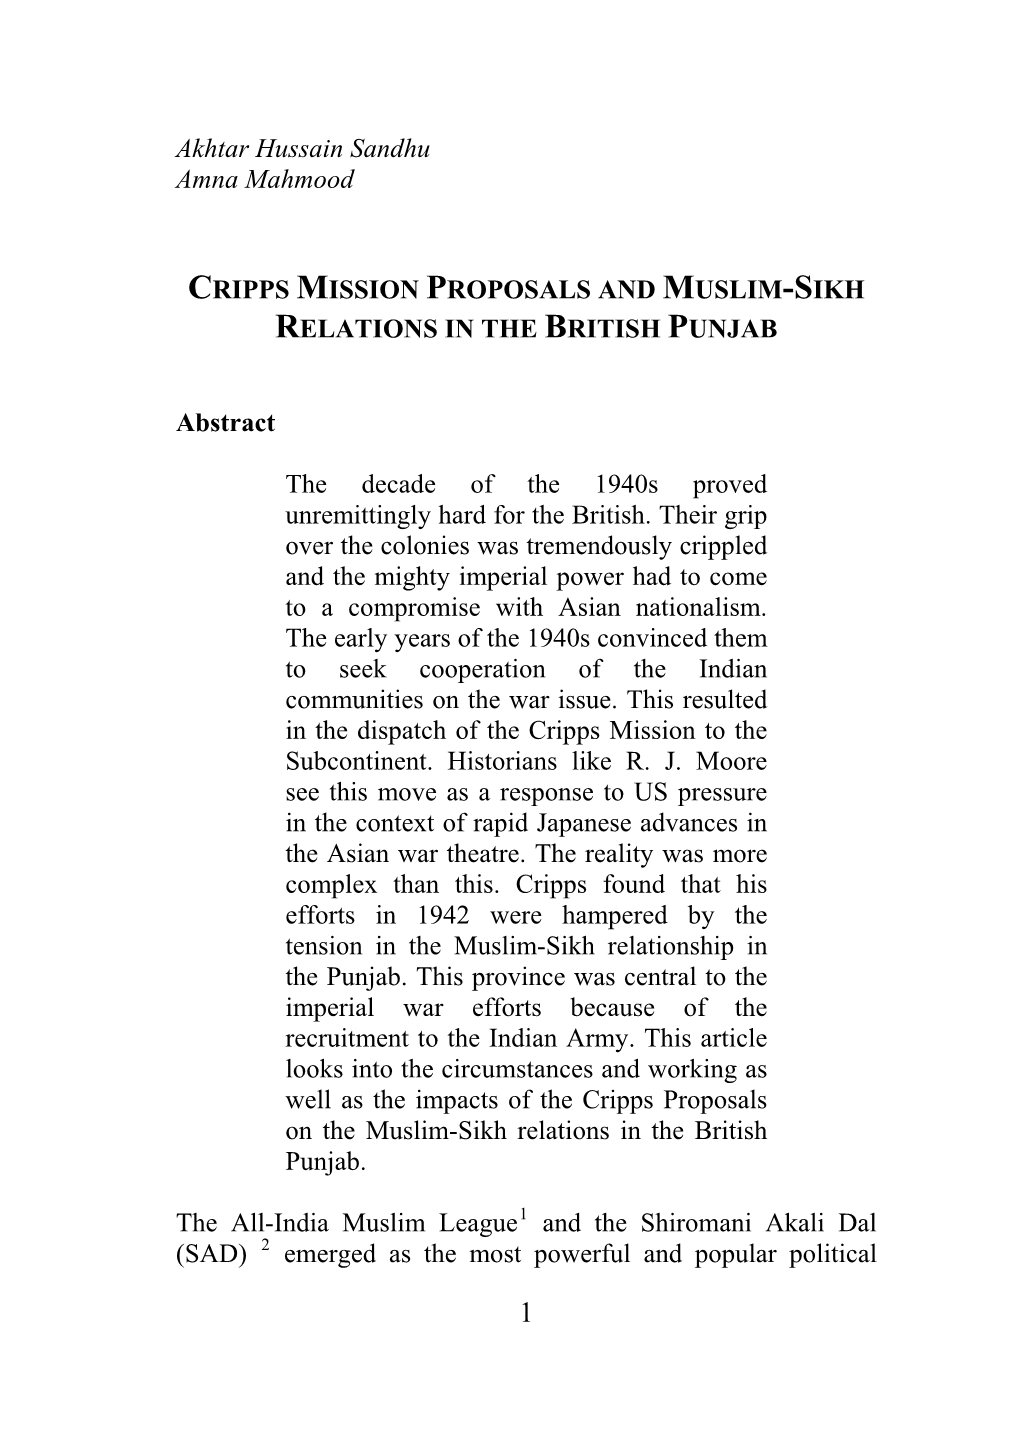 Cripps Mission Proposals and Muslim-Sikh Relations in the British Punjab